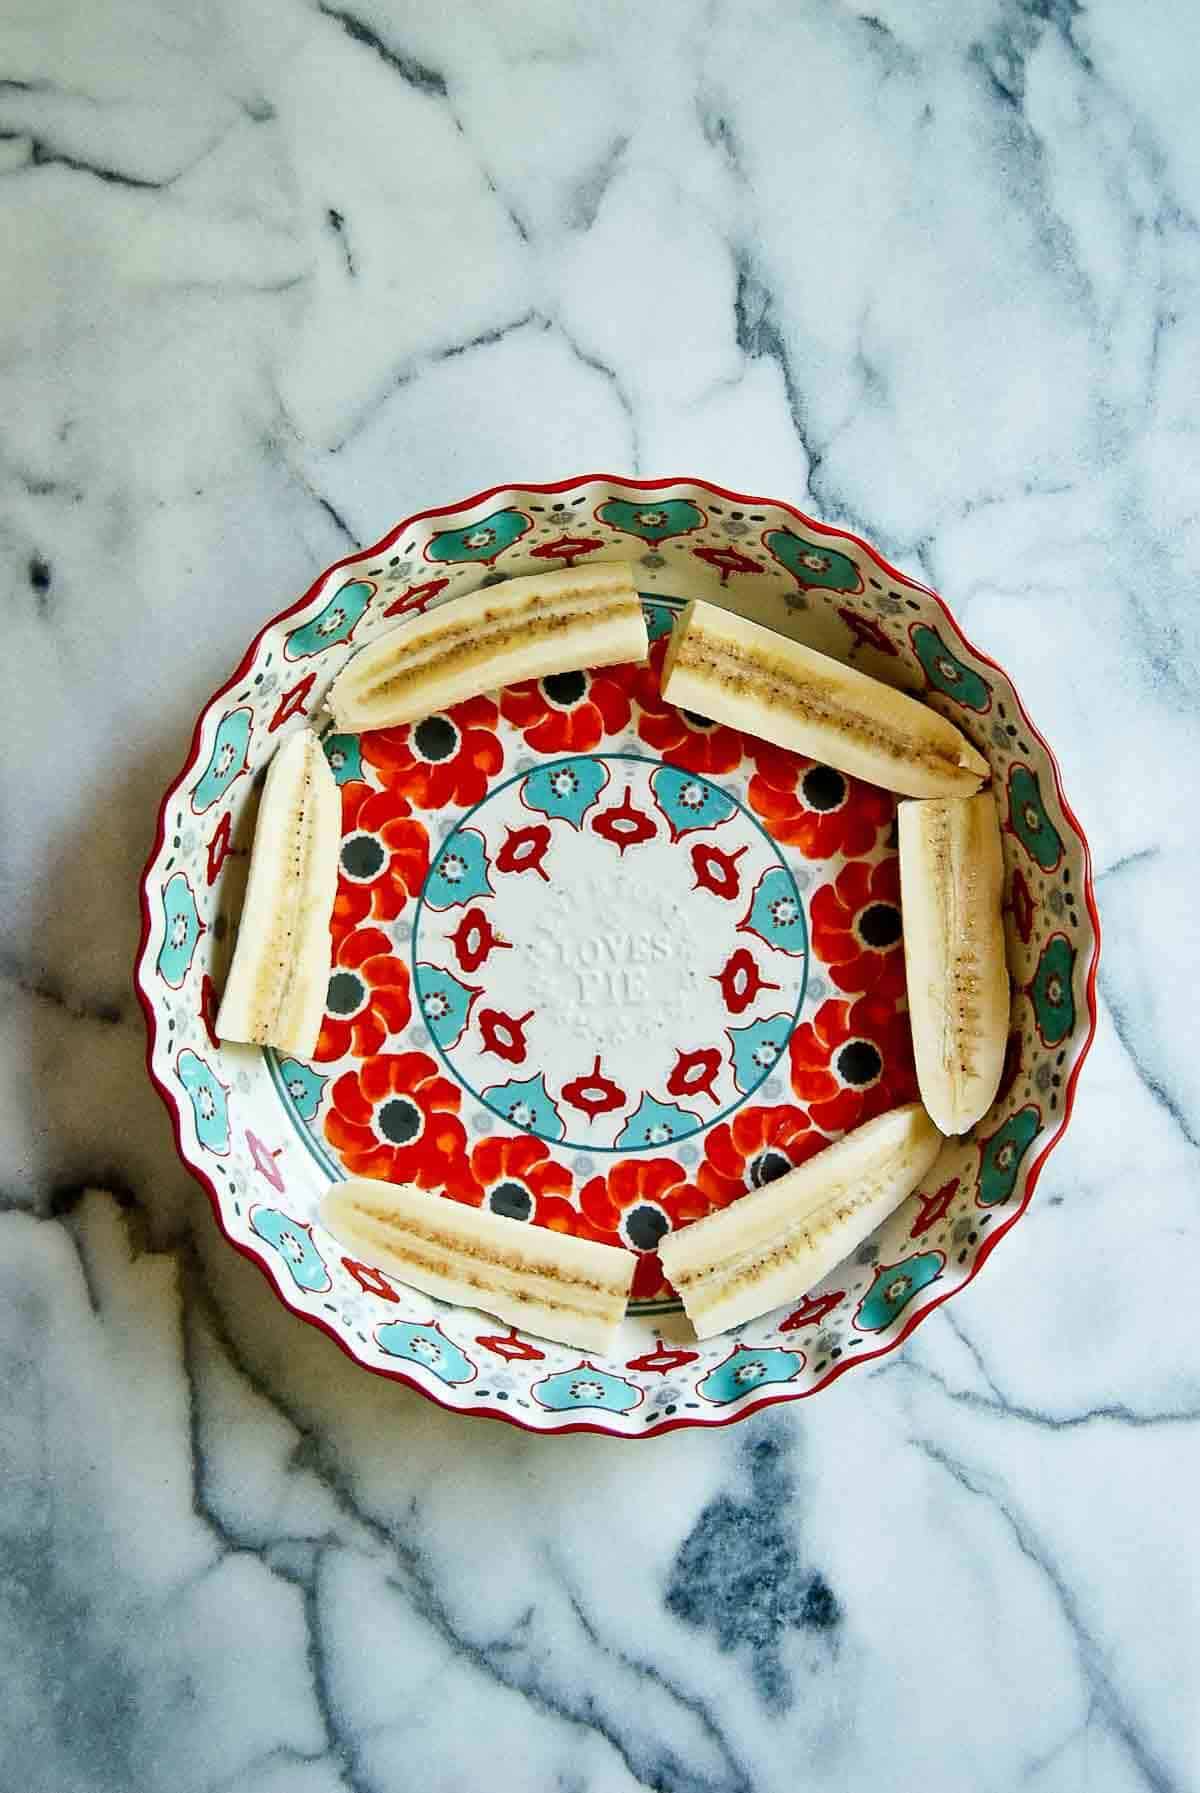 serving platter with banana halves around the perimeter.